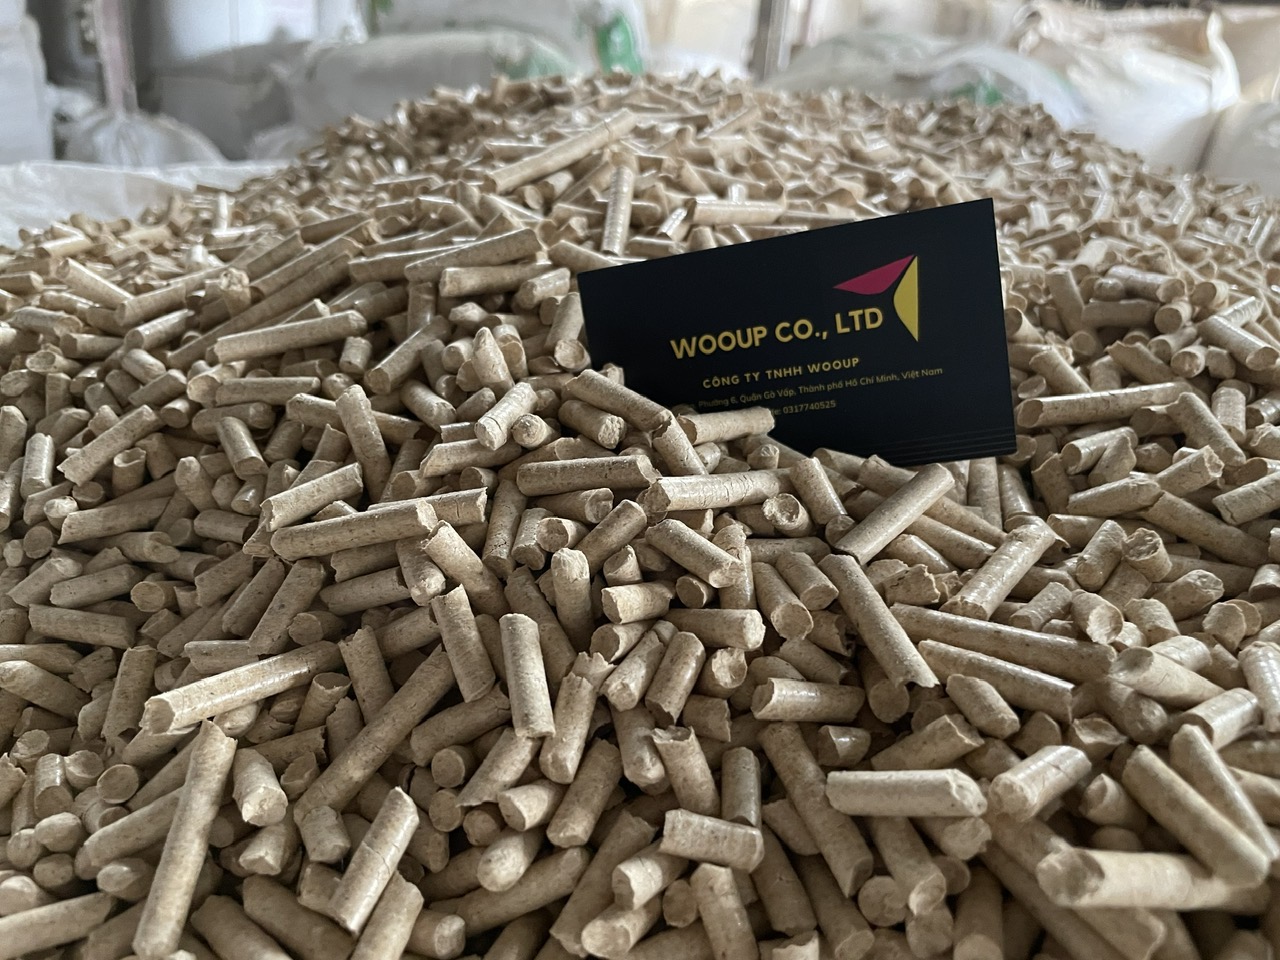 RISING WOOD PELLET EXPORTS: Vietnam's Growing Role in Global Markets